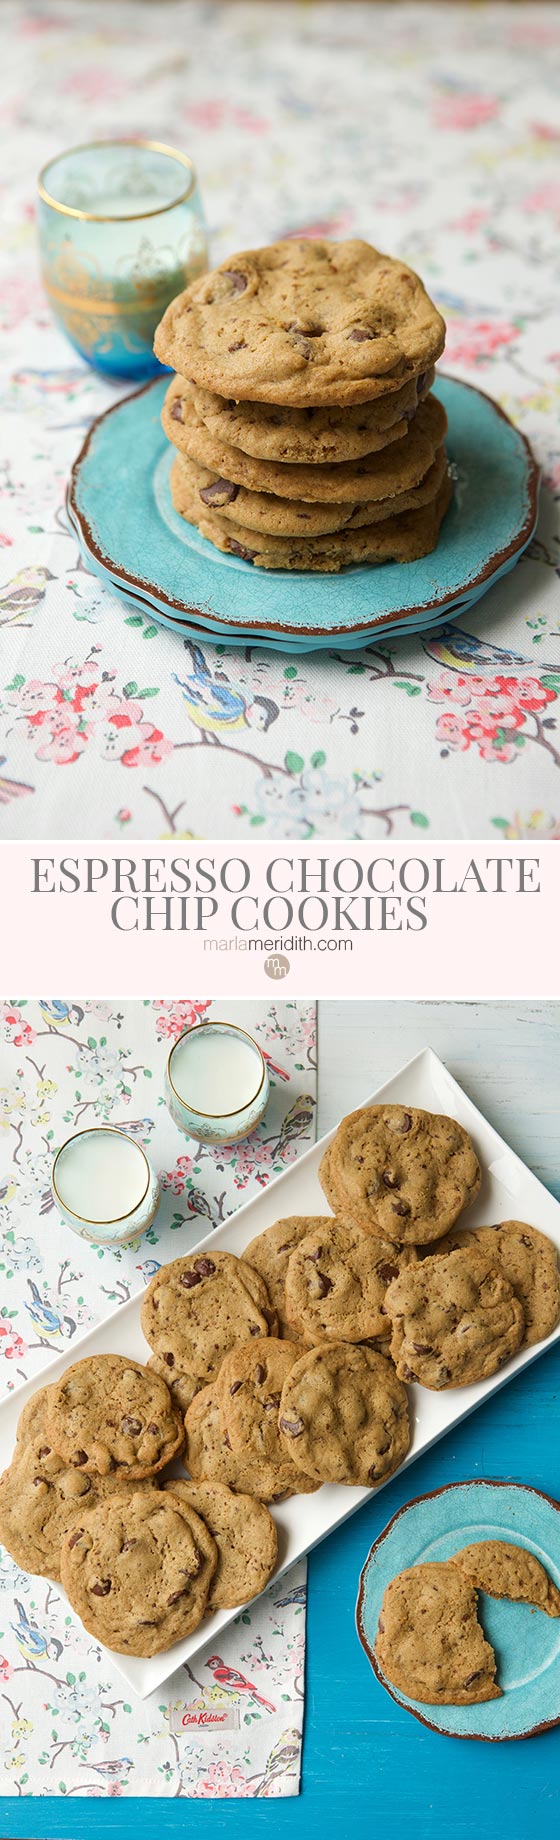 These Espresso Chocolate Chip Cookies will put a little pep in your step and a smile on your face. Get the recipe on MarlaMeridith.com